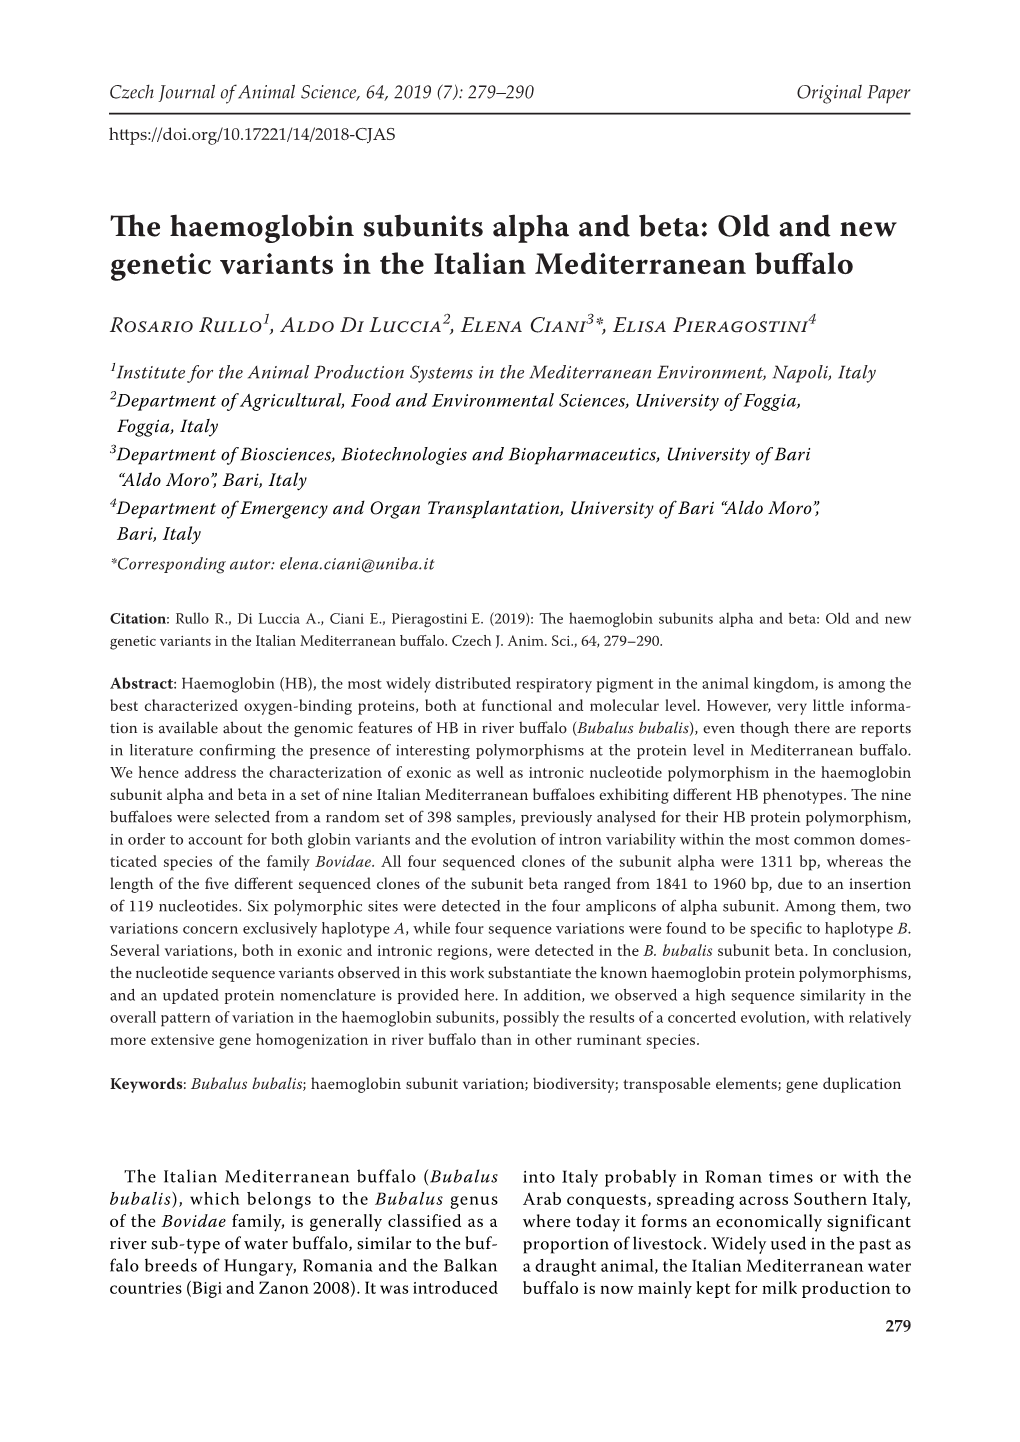 The Haemoglobin Subunits Alpha and Beta: Old and New Genetic Variants in the Italian Mediterranean Buffalo